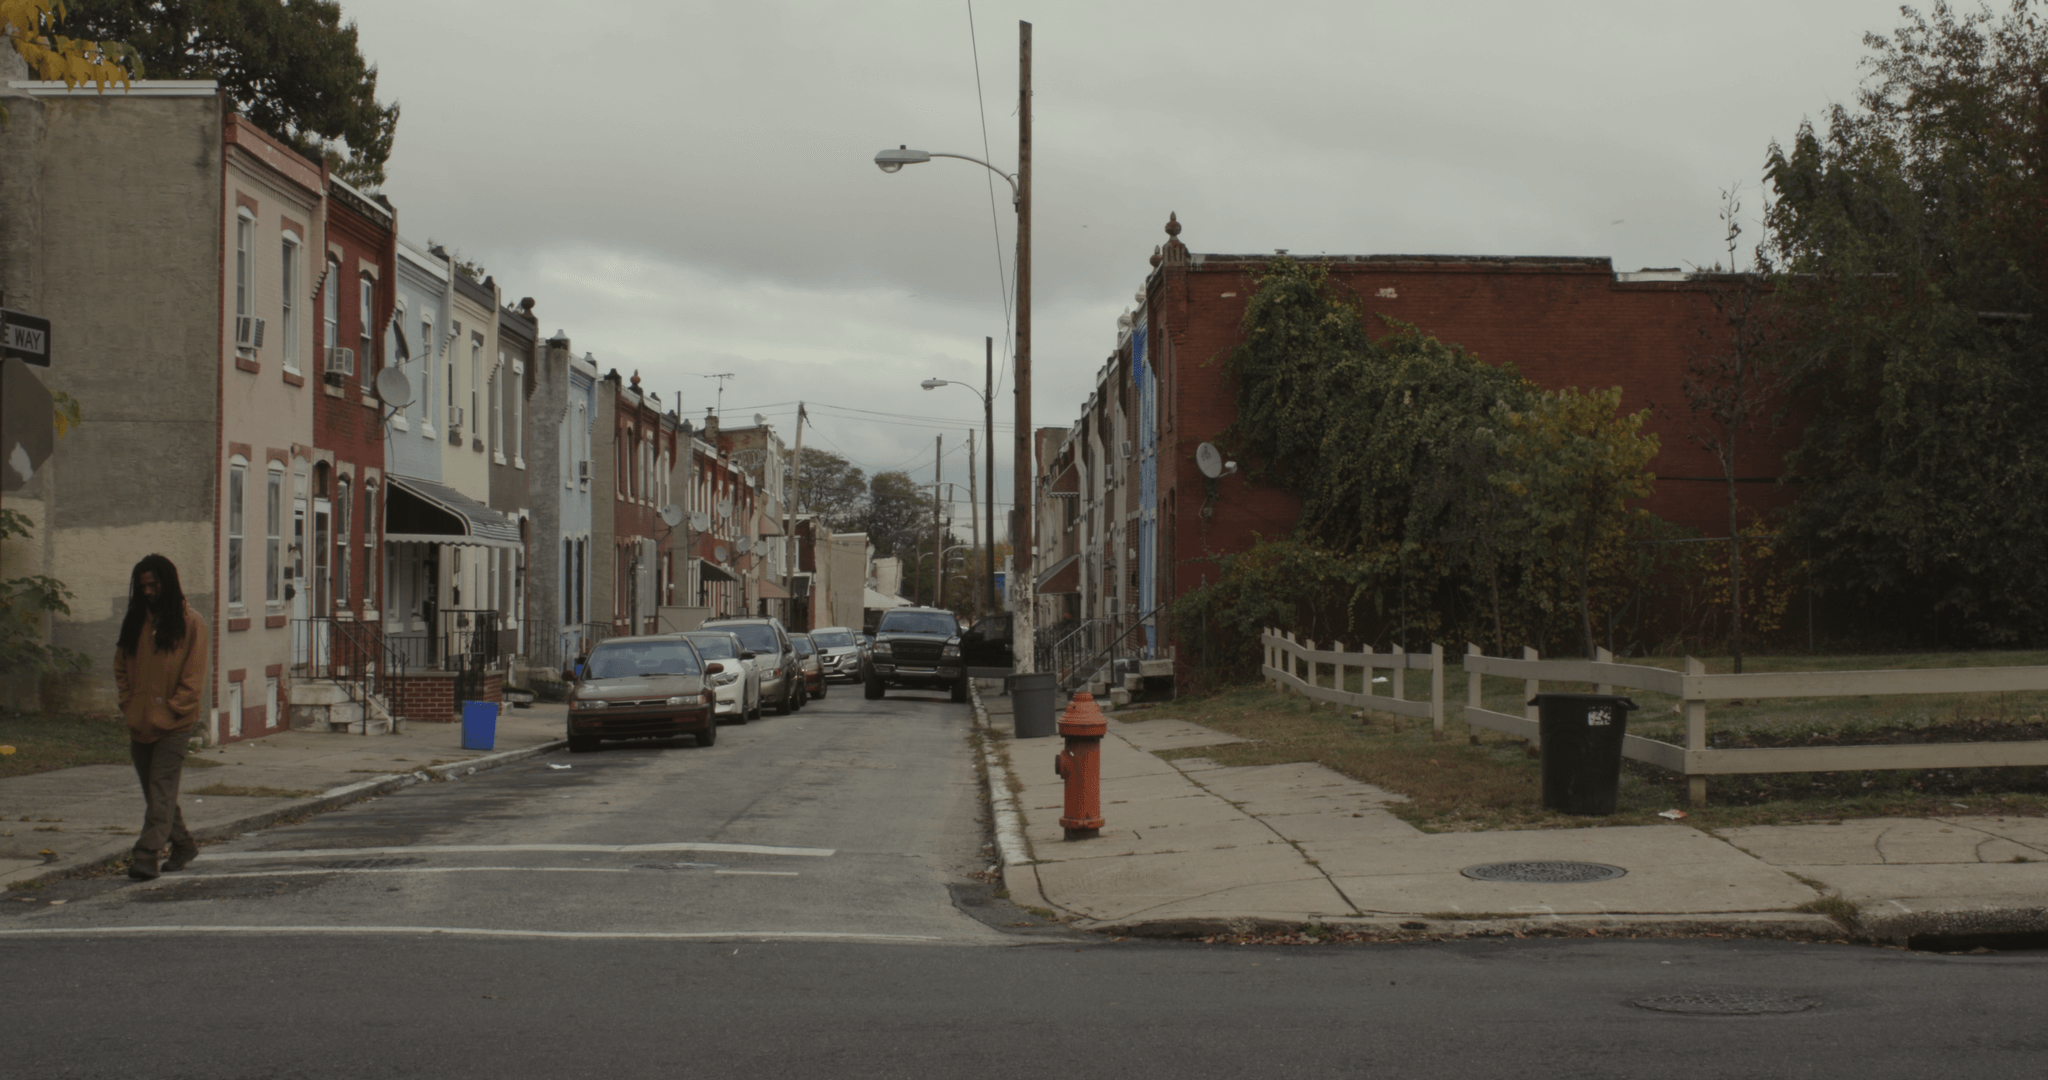 Still from I'm Free Now You Are Free. A wide shot of a city street. Two-story buildings line both sides of the street, and a fenced-in green area is to the right. The sky is overcast, and a man is walking on side of the street.